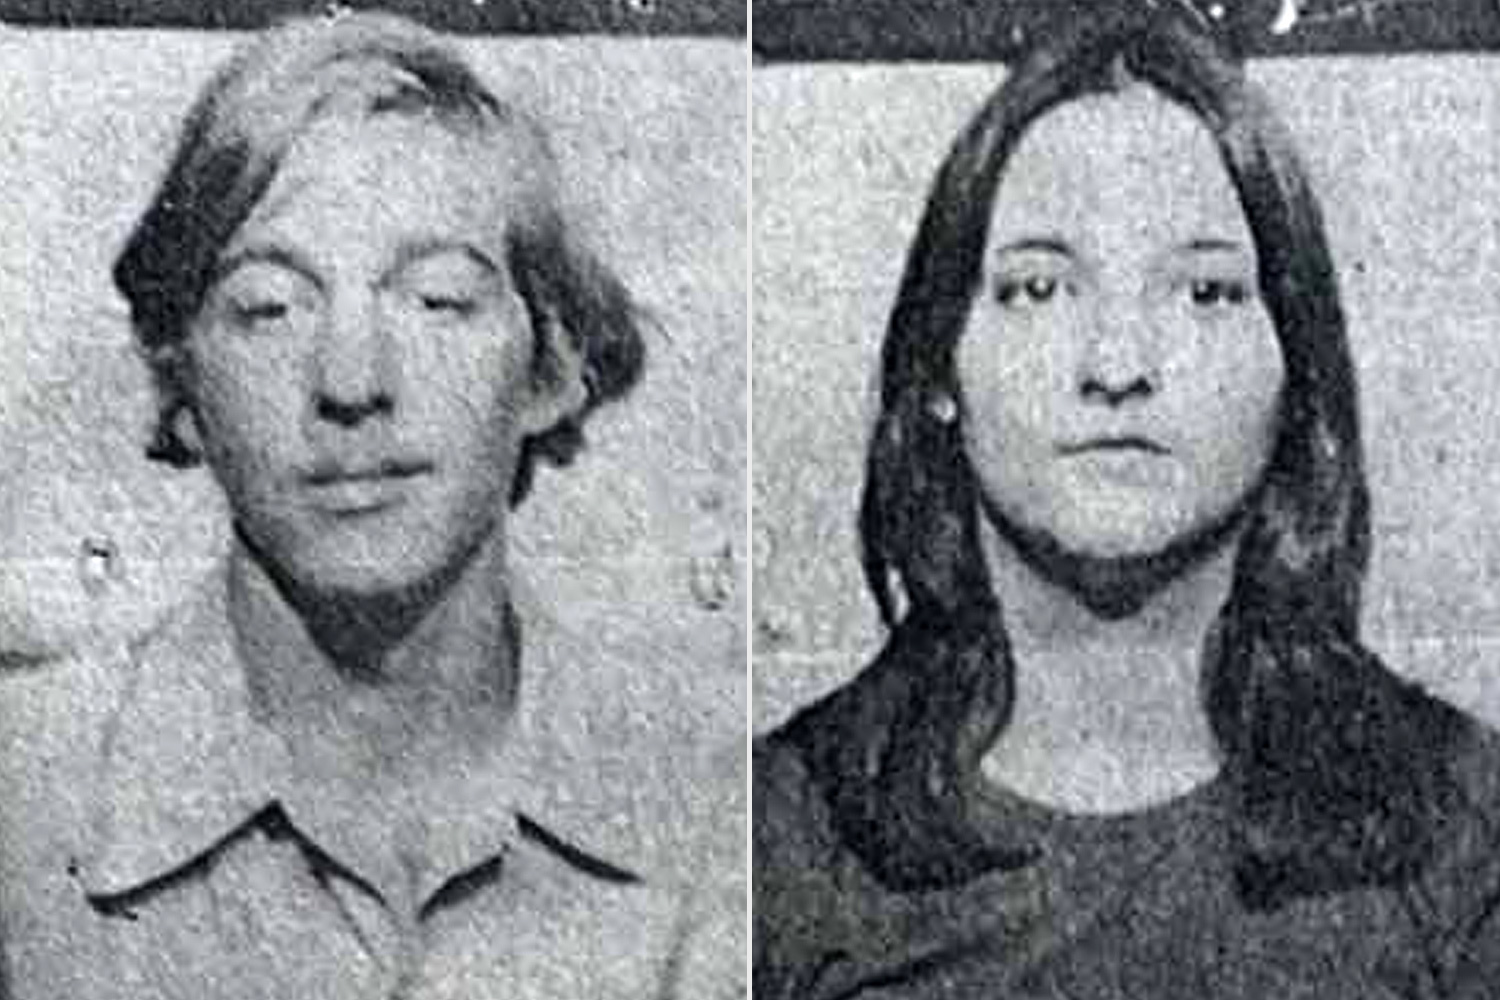 [IMAGE] The Gruesome Murders of 2 Teen Hitchhikers Shocked an Ore. Community — 43 Years Later, Police Close the Case